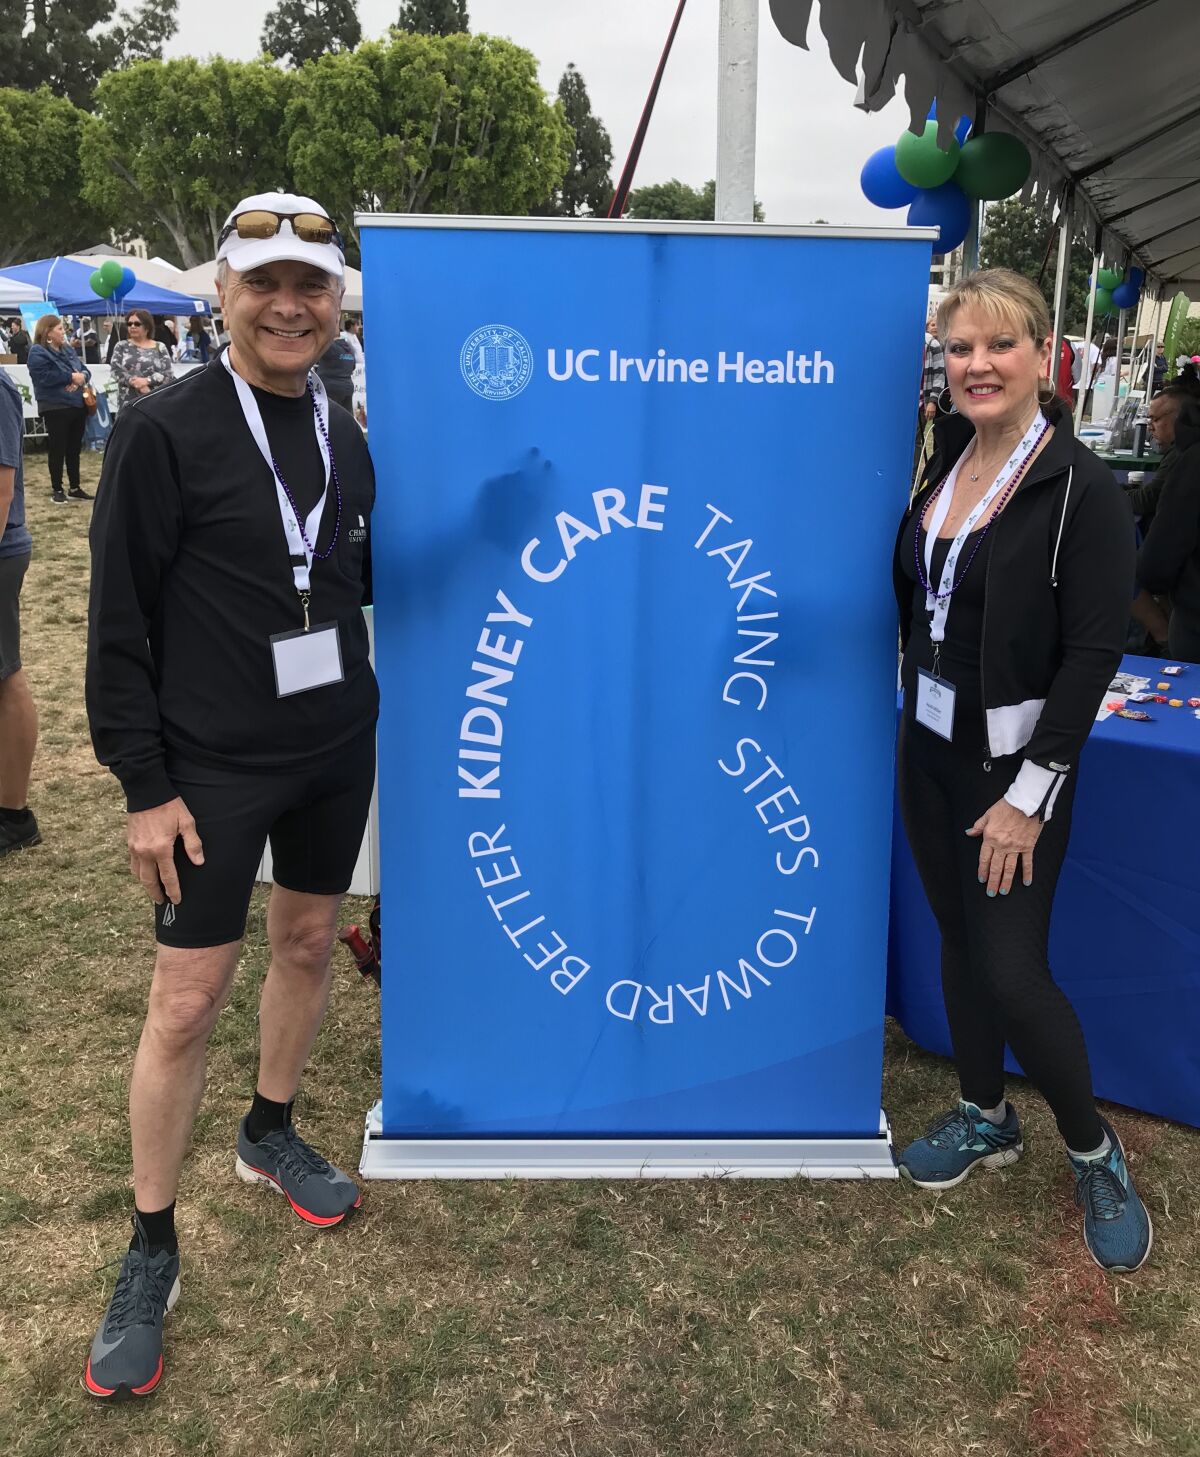 Dr. Jim Doti and Heidi Miller at a UC Irvine Health event for kidney care.